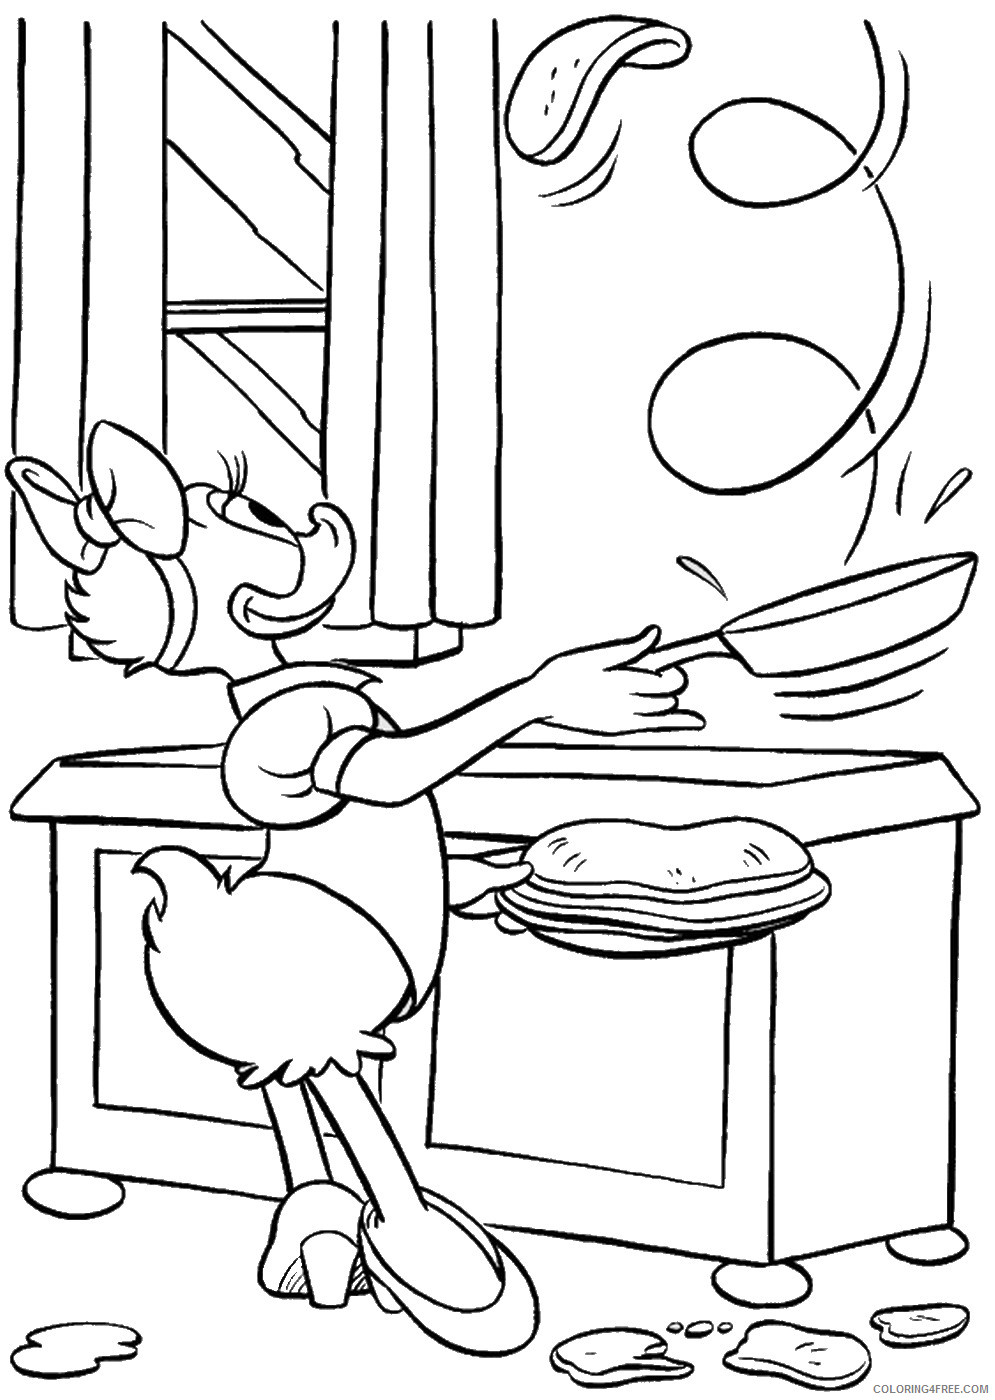 Daisy Duck Coloring Pages Cartoons donald_12 Printable 2020 2018 Coloring4free